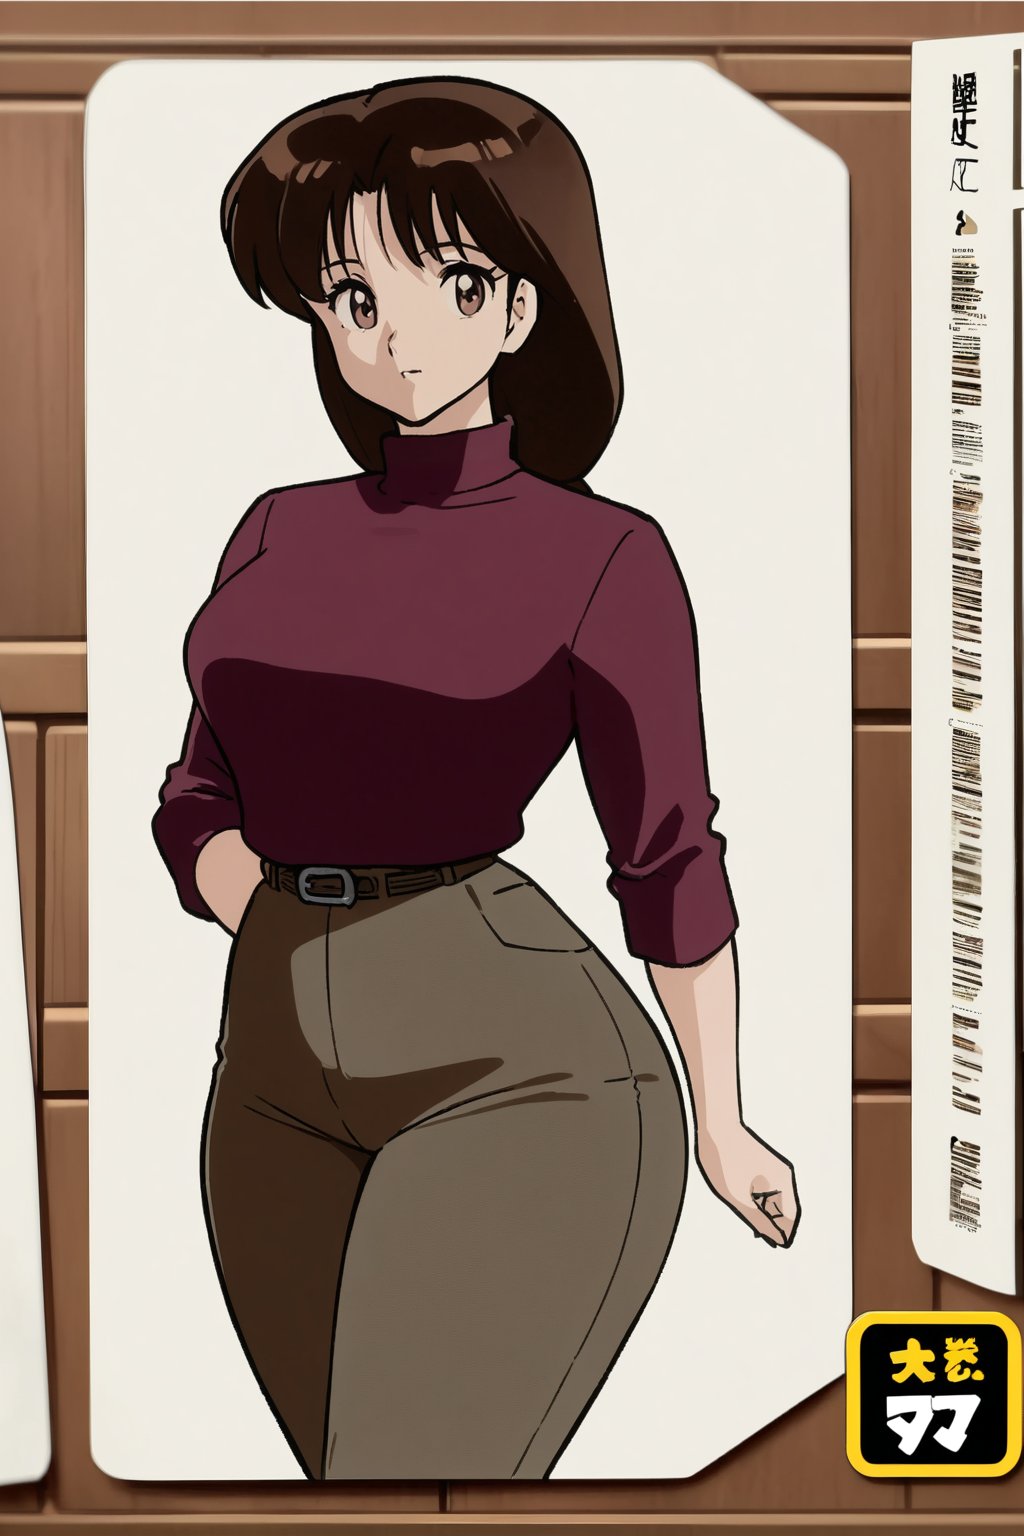 38 year old Milf Female, mature female, red long sleeves turtleneck shirt,tight brown trousers, grey boots, short neck curvy bang brown hair, brown eyes, curvy wide hips, Thicc Juicy Big Butt, 40 inches butt, character_sheet, looking-at-viewer, masterpiece, best quality, detailed face, HD detailed, high_resolution, Shinji_Nishikawa_Artstyle, Shoujo_Anime,90s Aesthetic